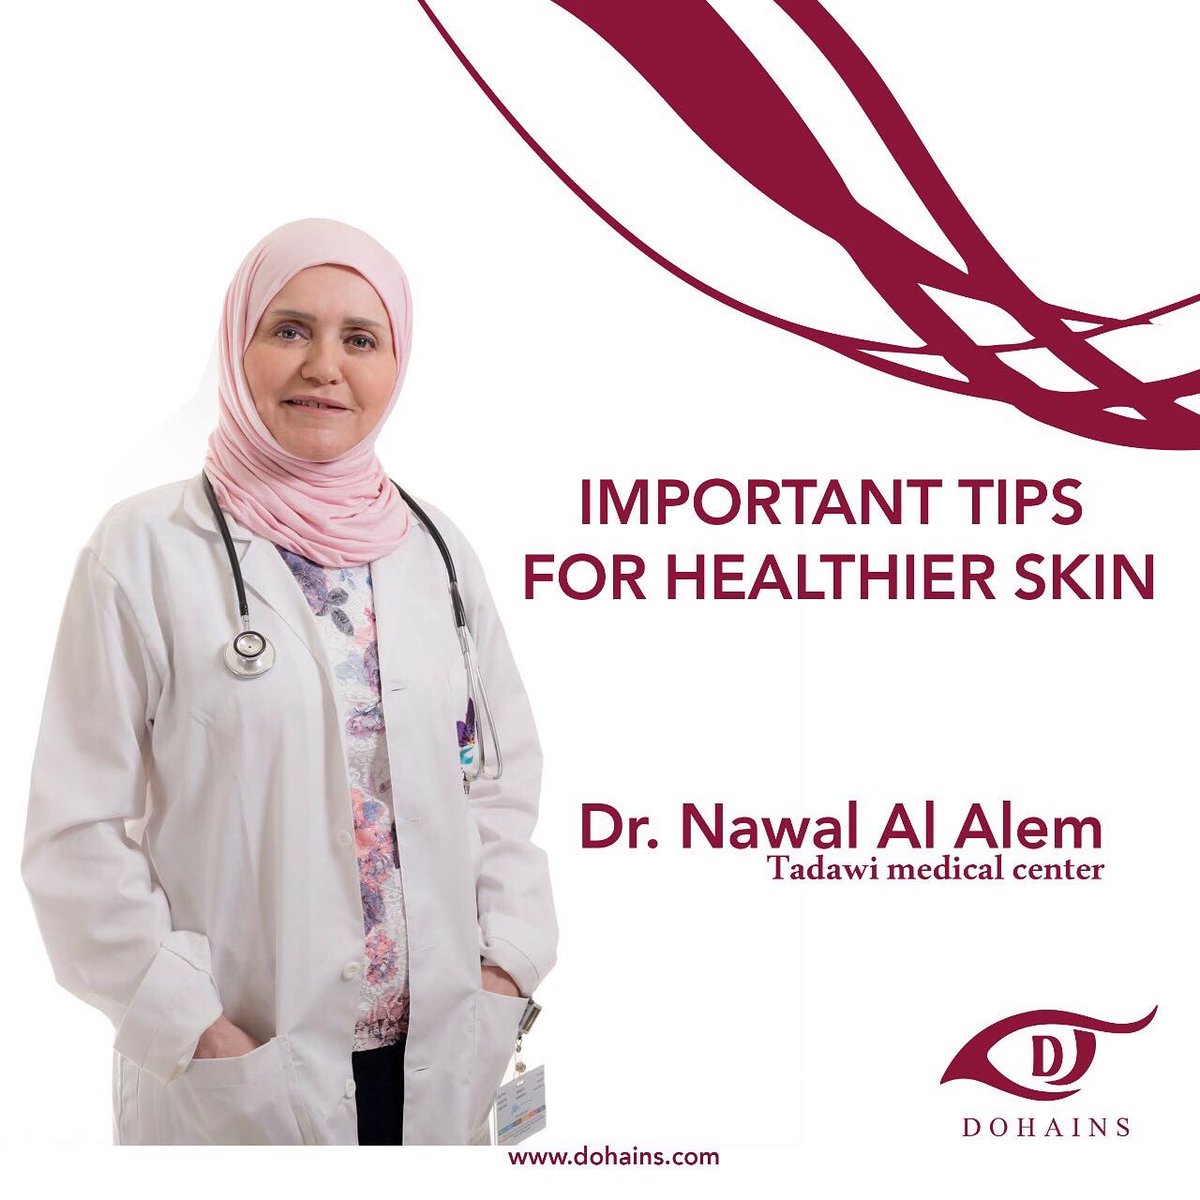 Would you like to have younger, healthier and better-looking skin? Consultant Dermatologist at Tadawi Medical Center Dr. Nawal Al Alem shares some tips to help you achieve this goal.
#qatar #doha #qatarnews #dohanews #health #qatarhealth #dohahealth #vaccine #skincare #healthre